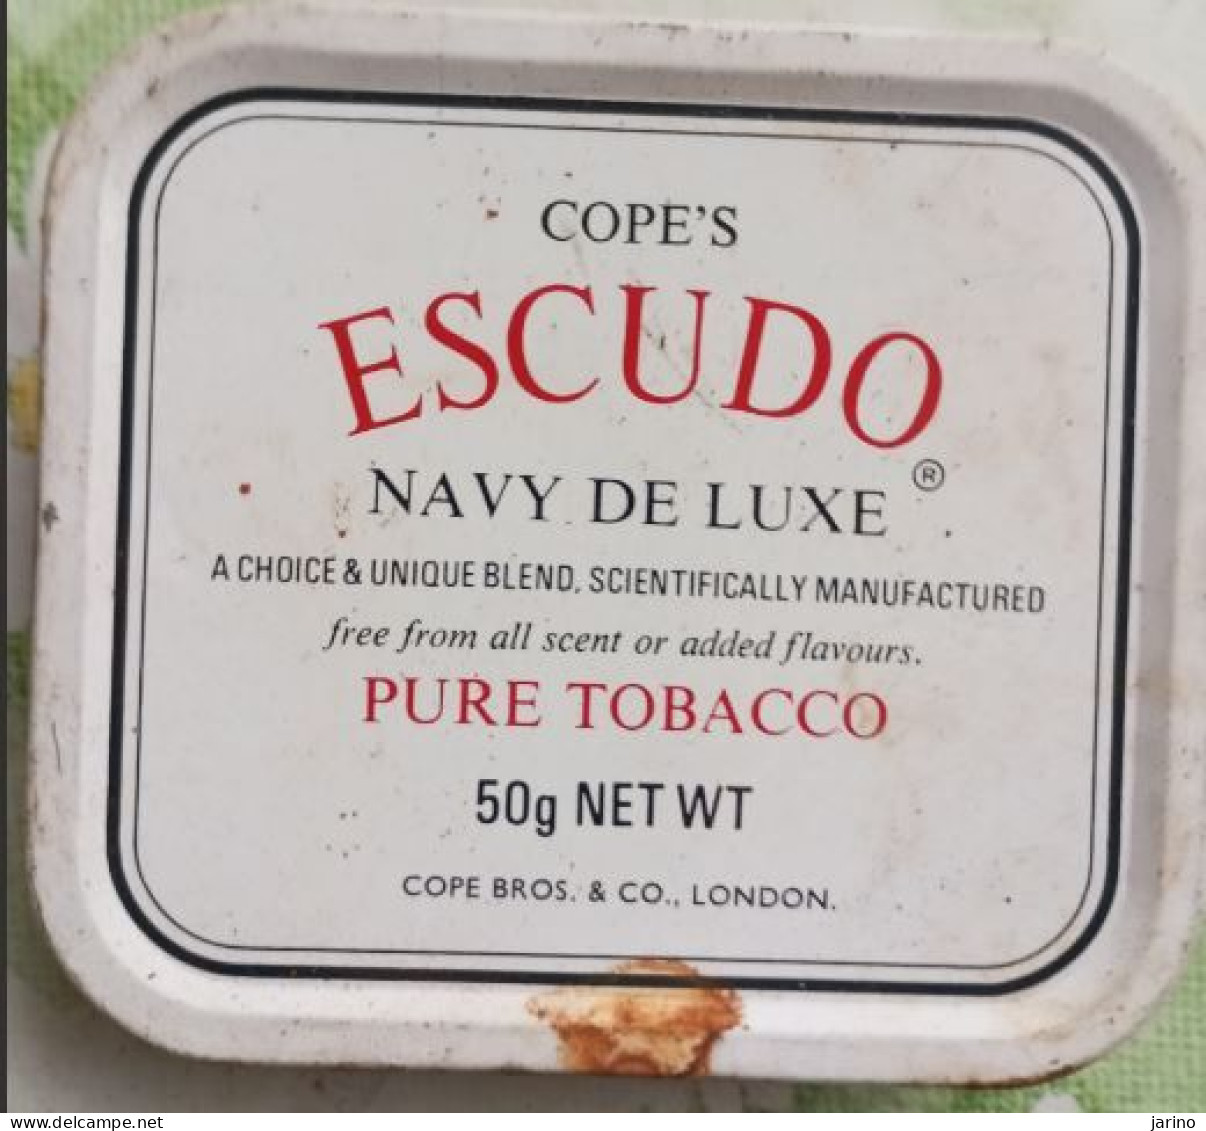 Ancient Empty Metal Tobacco Box Cope's ESCUDO Navy De Luxe, Cope Bros. & Co London, Made In UK, 9x8x2,5 Cm - Boites à Tabac Vides